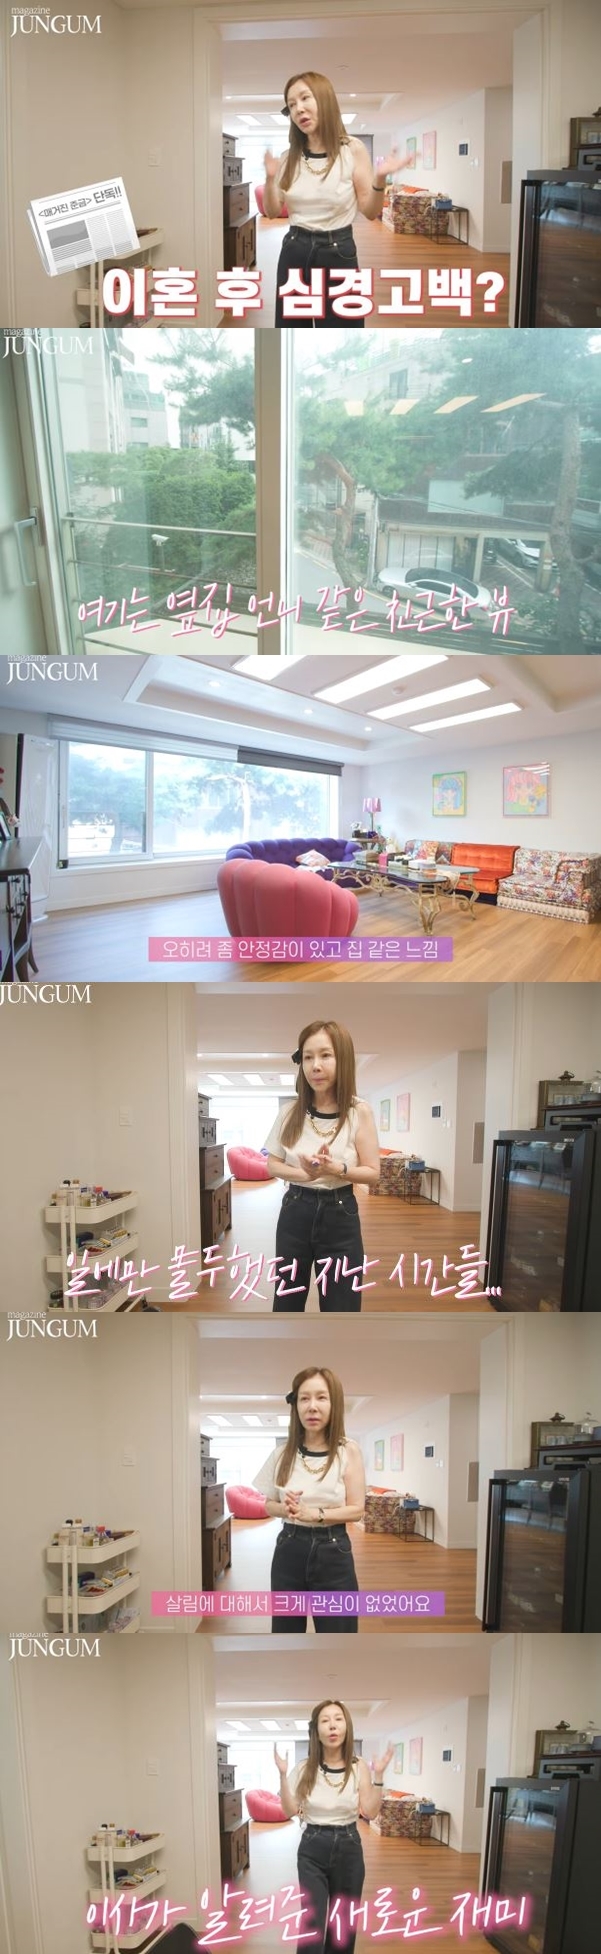 Actor Park Jun-geum tells of his recent moveOn August 31, the Communication channel  ⁇ Park Jun-geum Magazine JUNGUM ⁇  posted a video titled  ⁇  (Lanson Housewarming) moved from Luxury Han River View to Cheongdam-dong Luxury Villa! ⁇In the video, Park Jun-geum announced that Everyone Angelina moved and moved from Hannam-dong Han River view house to Cheongdam-dong luxury villa.Park Jun-geum then introduced the living room, the clothes room, and the kitchen in turn.Park Jun-geum expressed satisfaction with the new house, saying, I have already seen the Han River view, but it is a tree view. It is rather stable and home-like.In fact, he was not interested in living after his divorce. I was devoted to work, but when I moved in this time, I bought a niche and put it in. It was so fun. I lived without knowing that kind of fun.